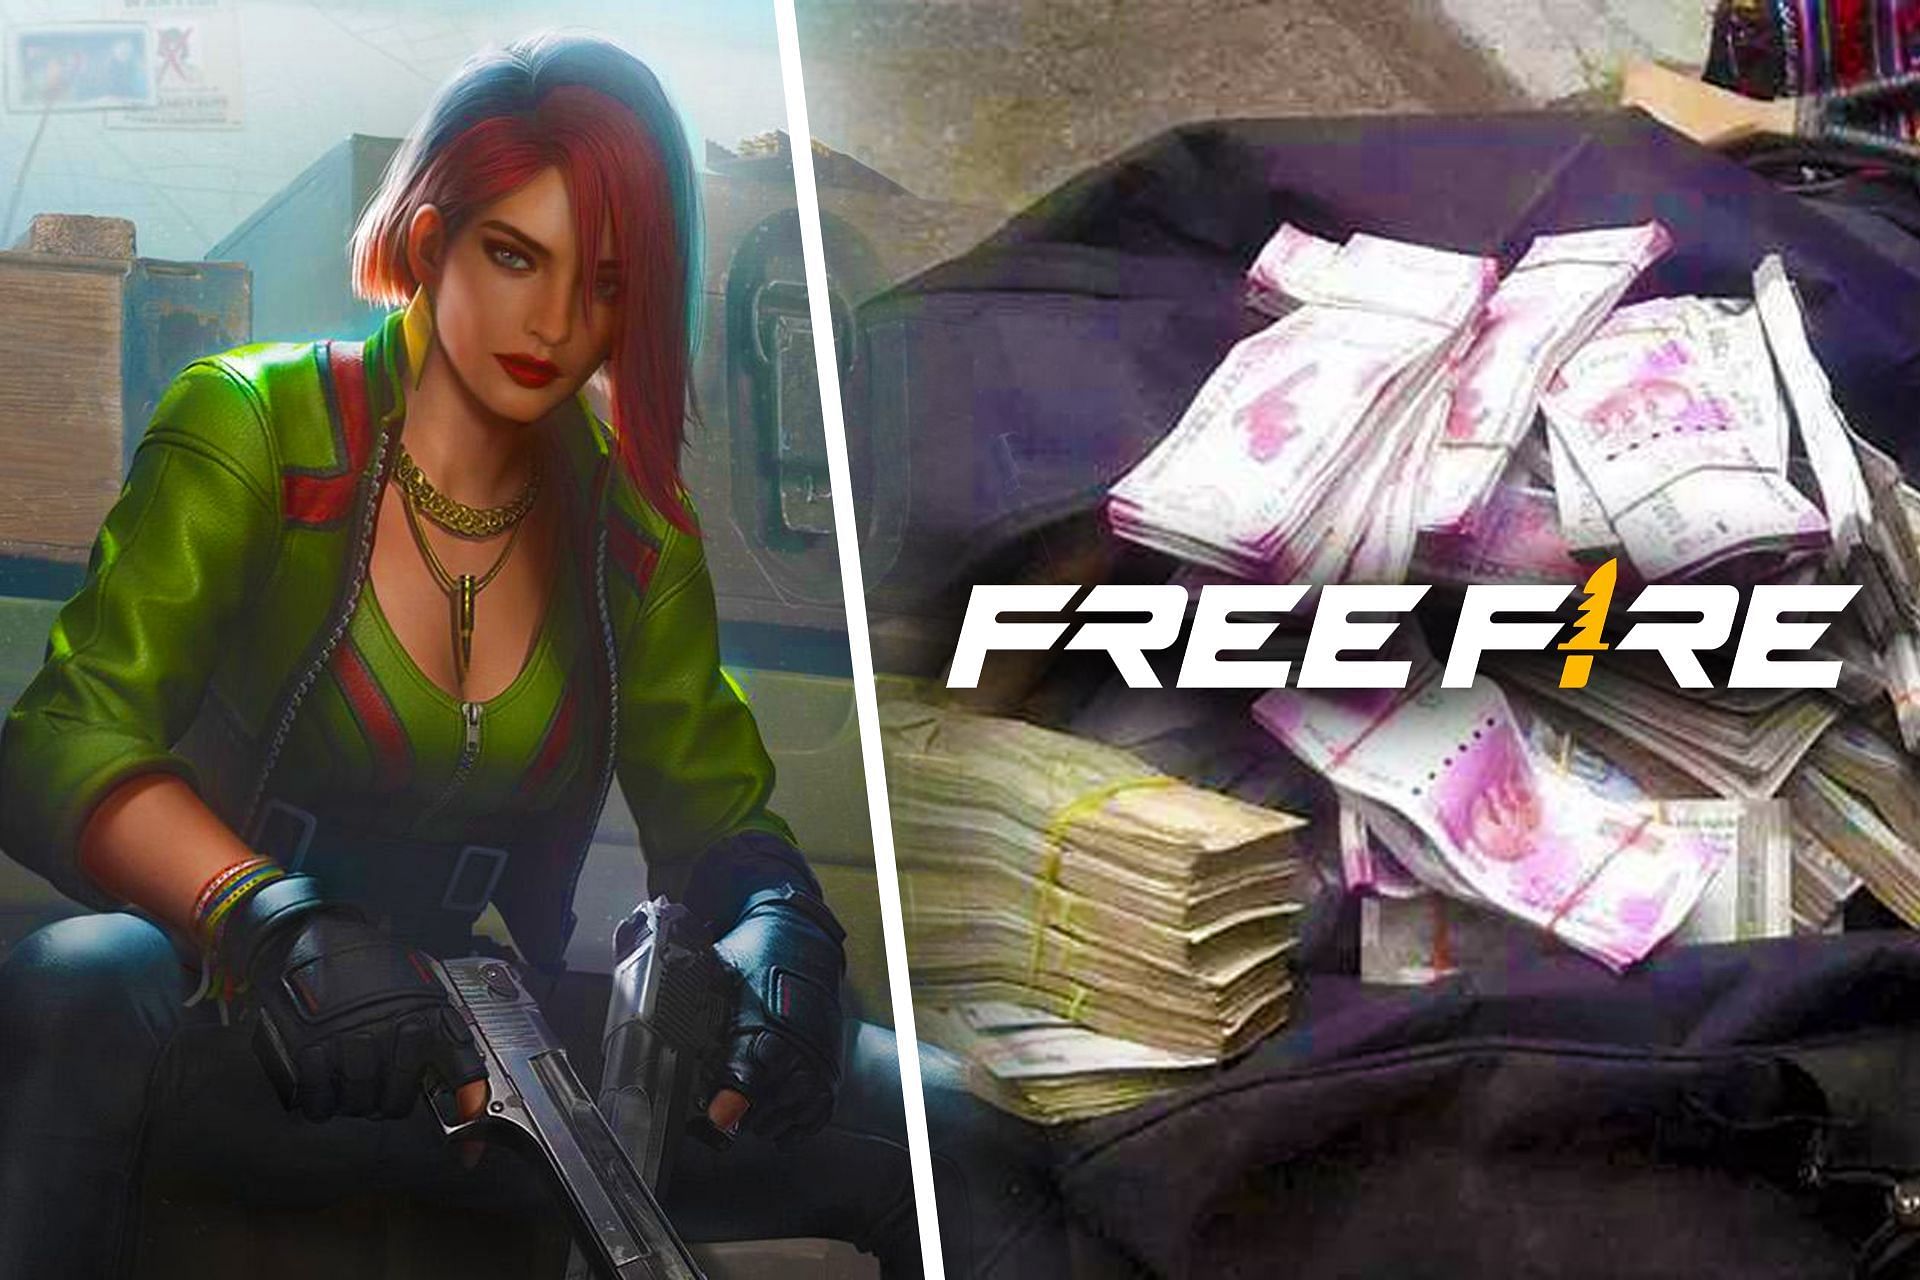 Free Fire lands in another trouble as ED raids Coda Payments in a Money Laundering probe (Image via Sportskeeda)